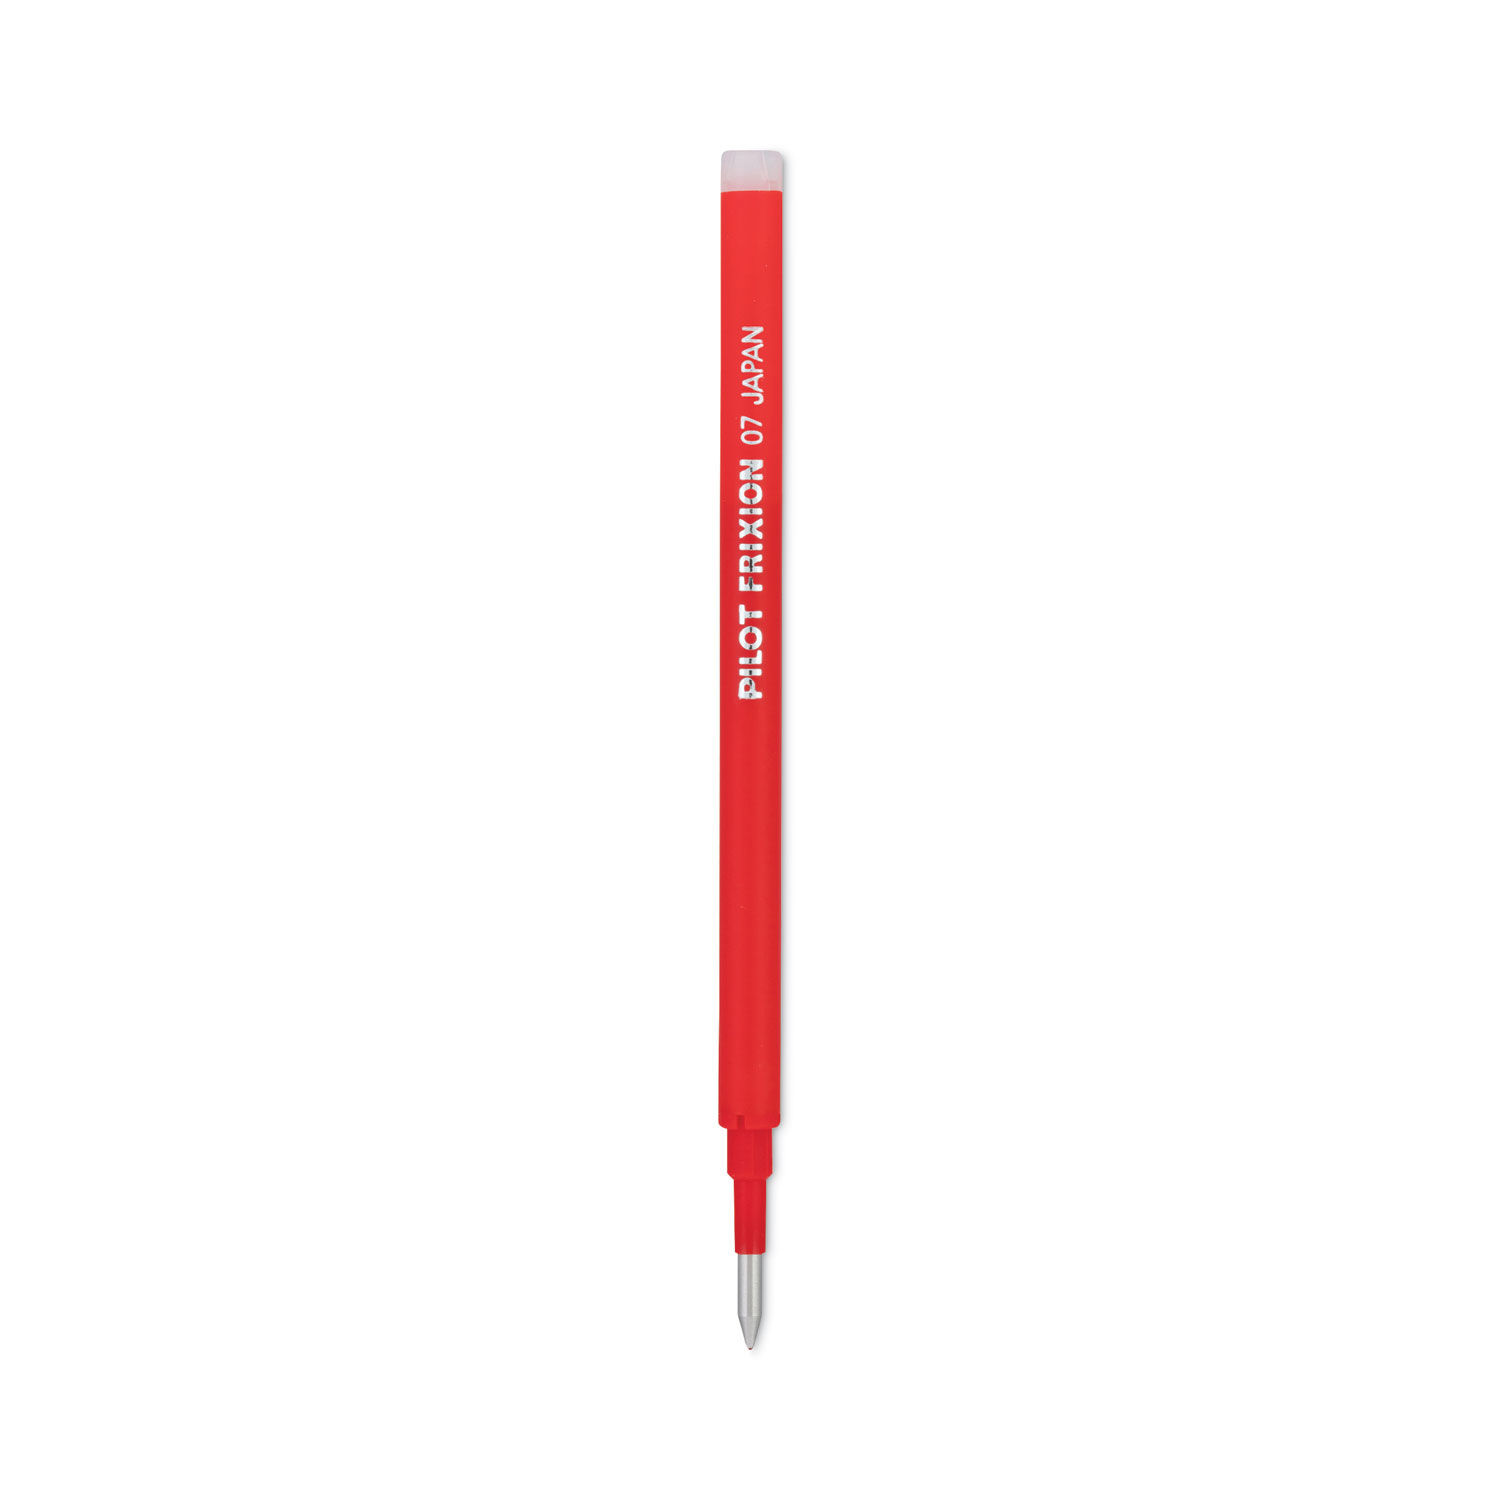 Refill for Pilot FriXion Erasable FriXion Ball, FriXion Clicker and FriXion LX Gel Ink Pens, Fine Tip, Red Ink, 3/Pack